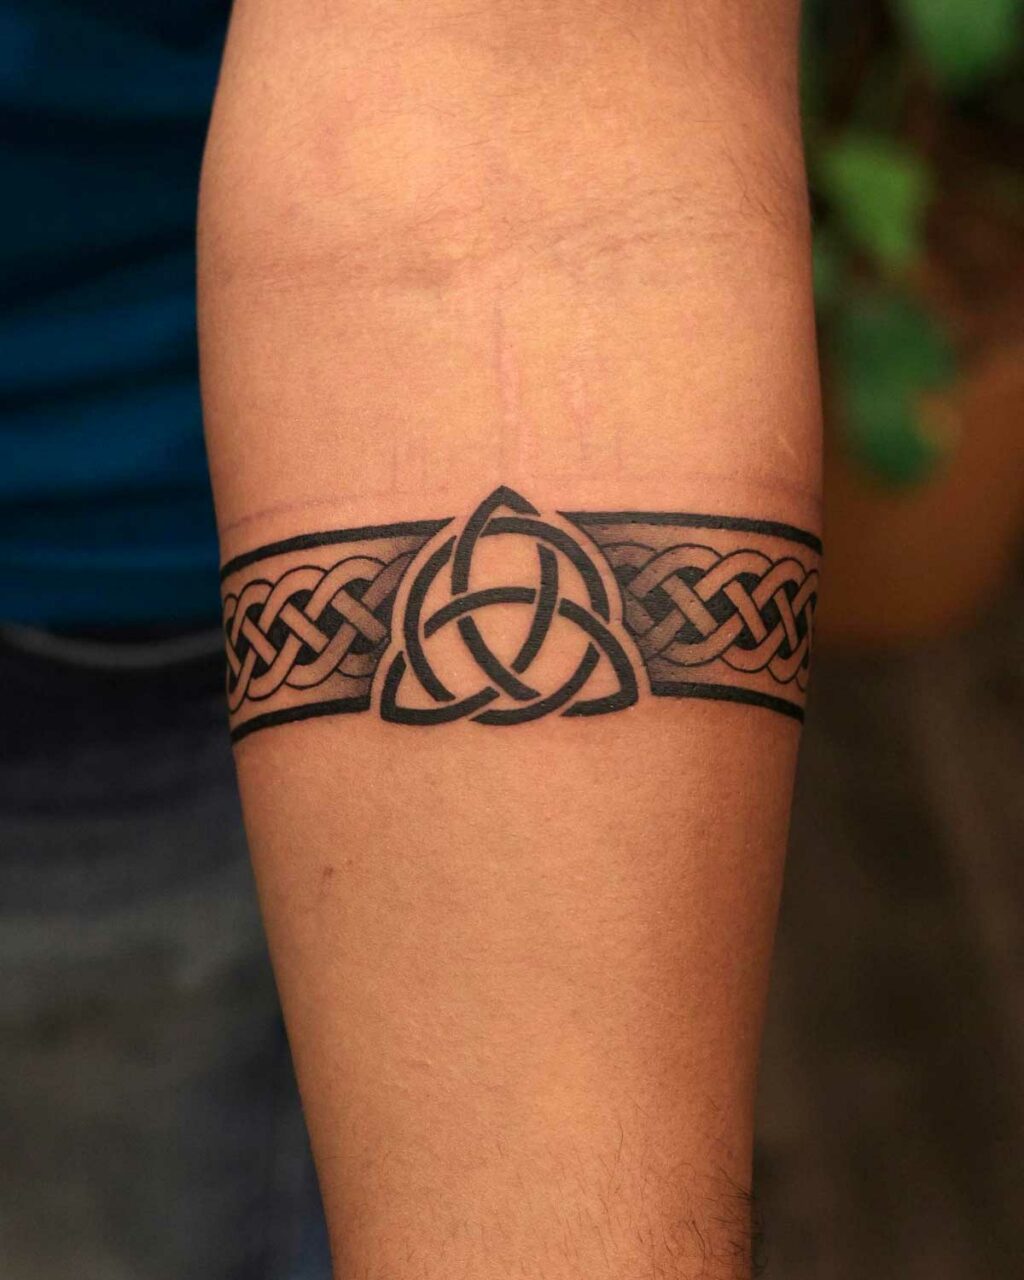 Minimalist Tattoo Designs for Men: Stylish and Meaningful Choices